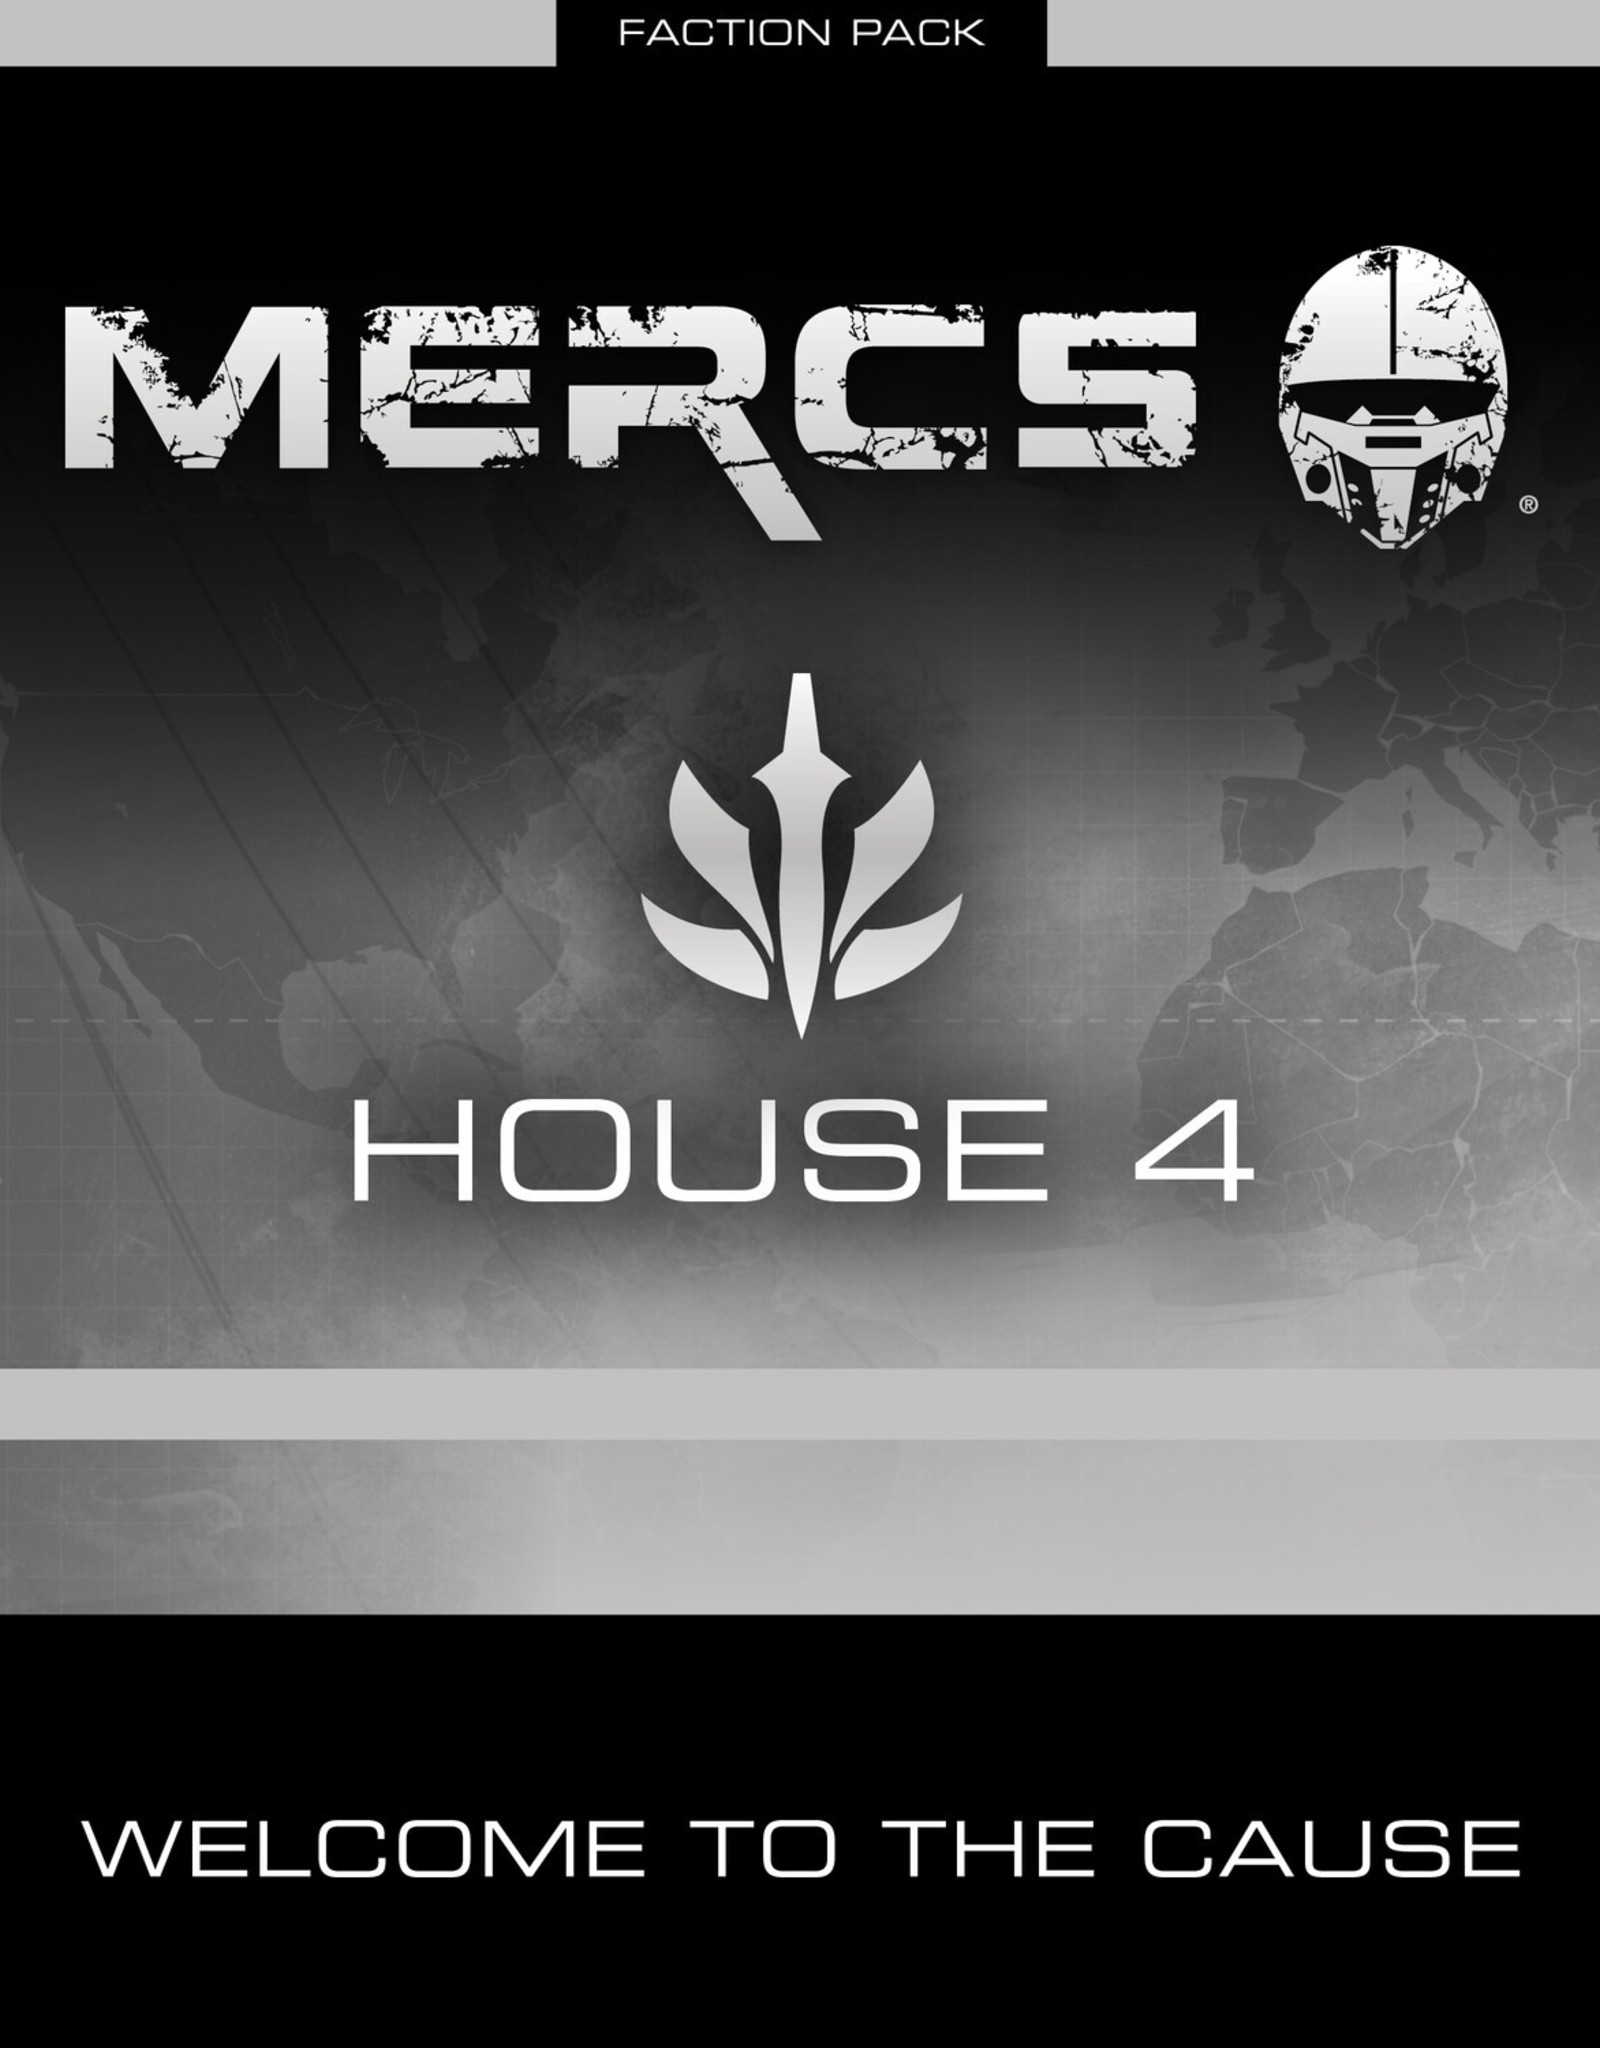 Fifth Angel Studios House 4 Faction Pack #2